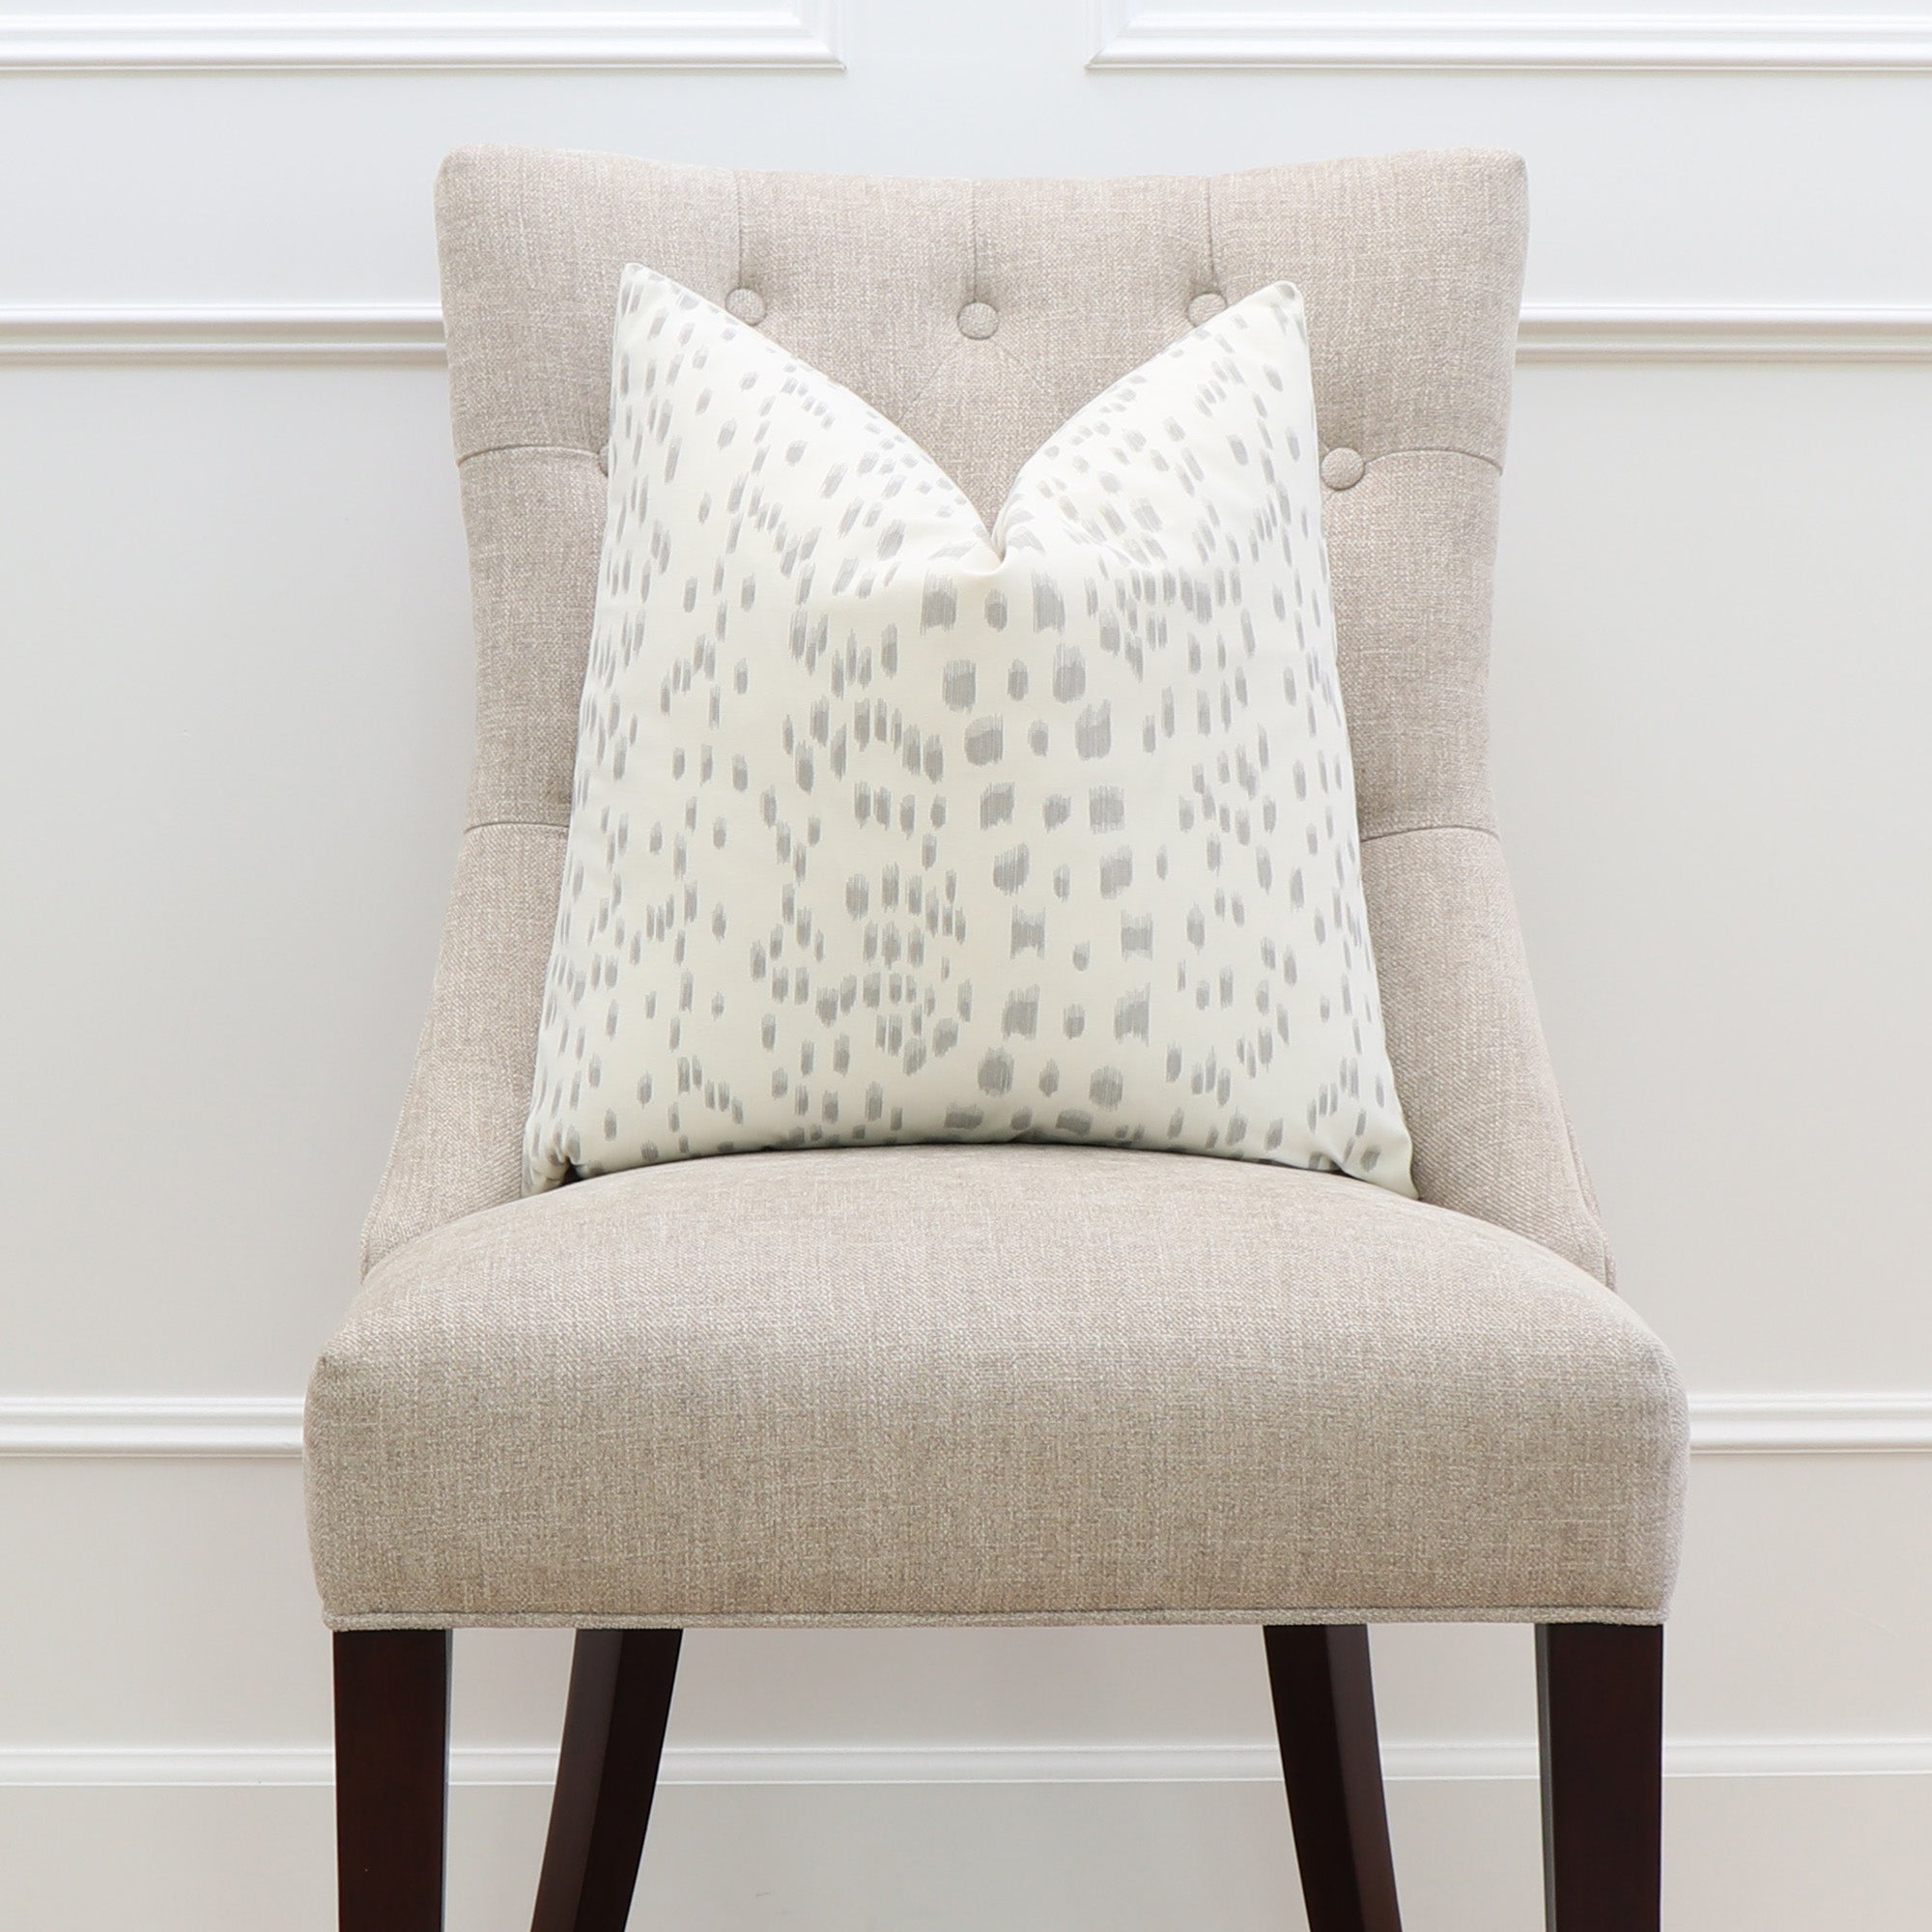 Les Touches Grey Throw Pillow Cover on Dining Chair